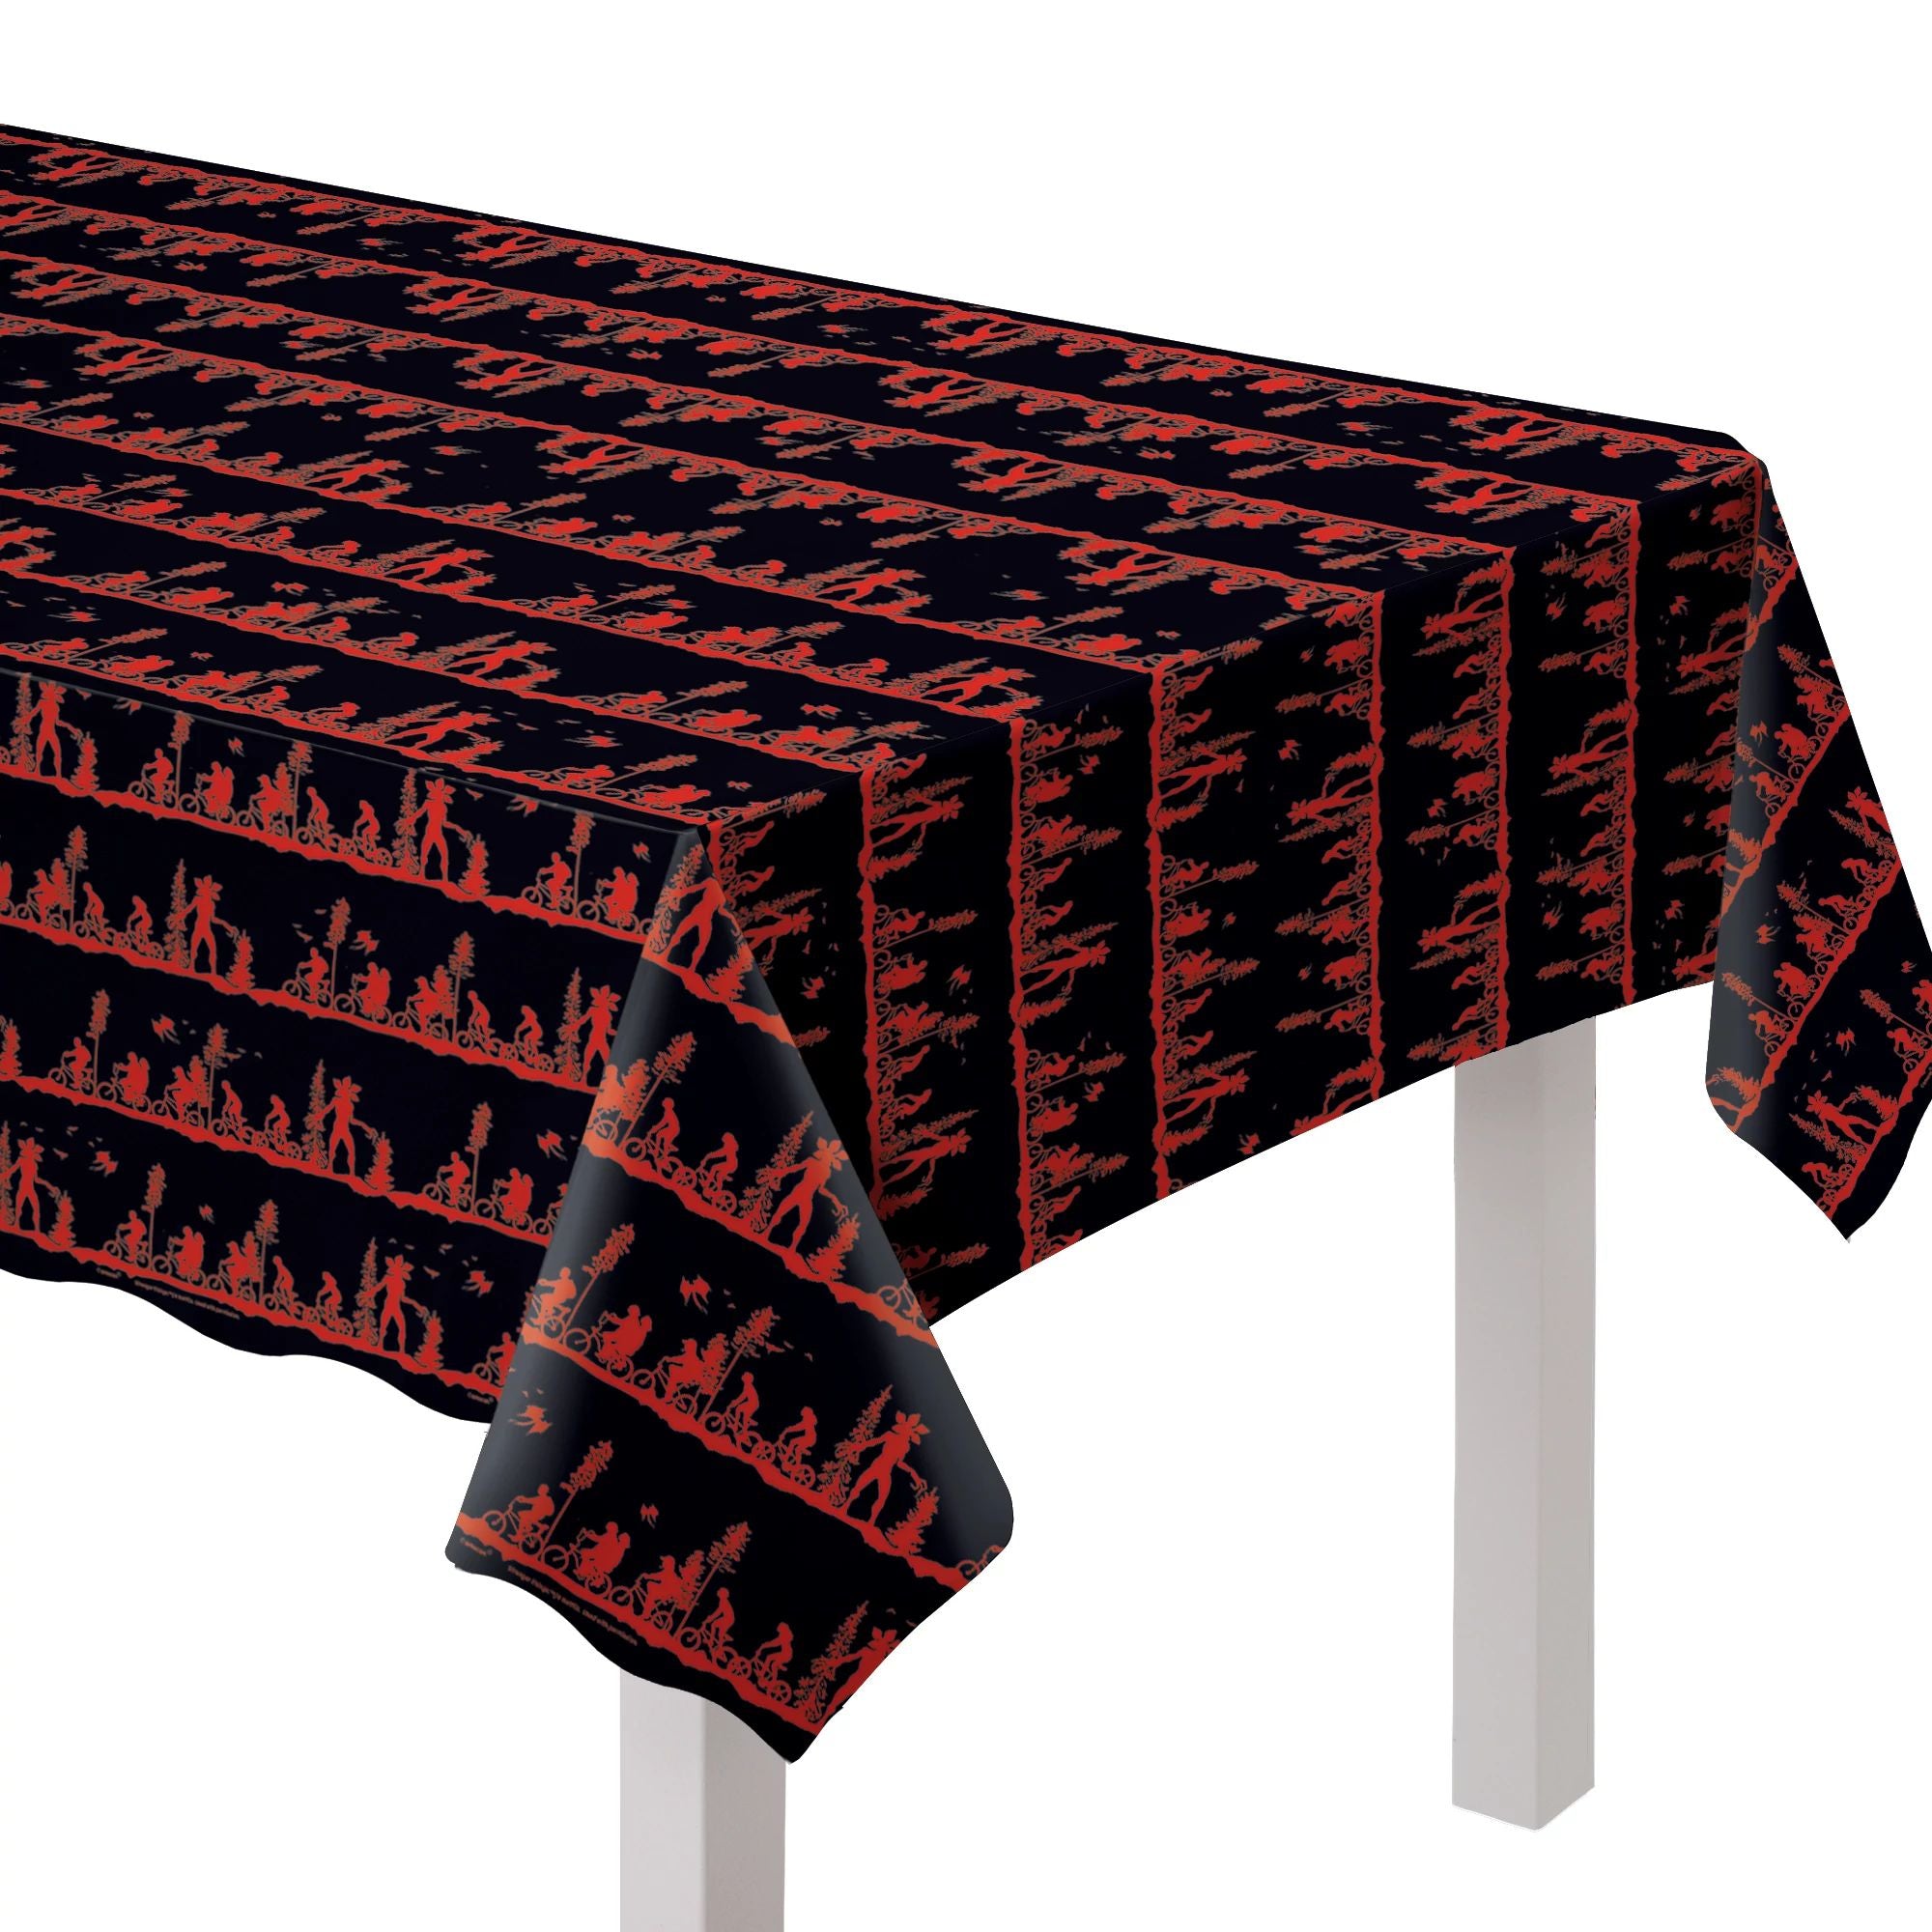 Stranger Things The Upside Down Table Cover